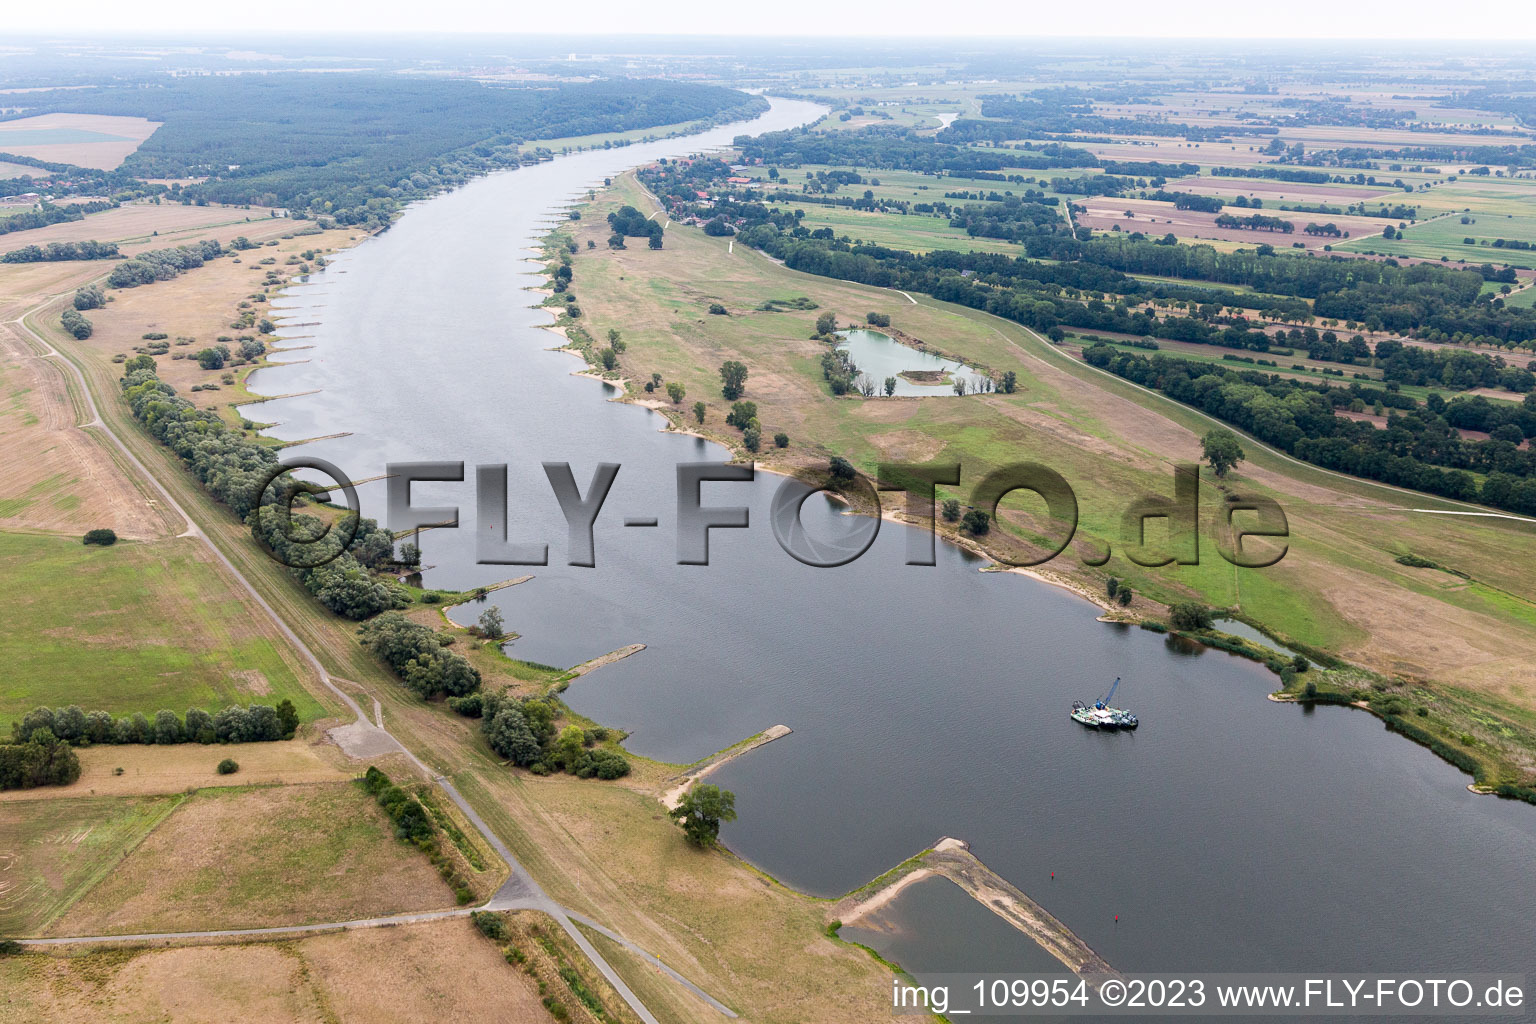 Aerial view of Lauenburg foothills of the Elbe in Lauenburg in the state Schleswig Holstein, Germany